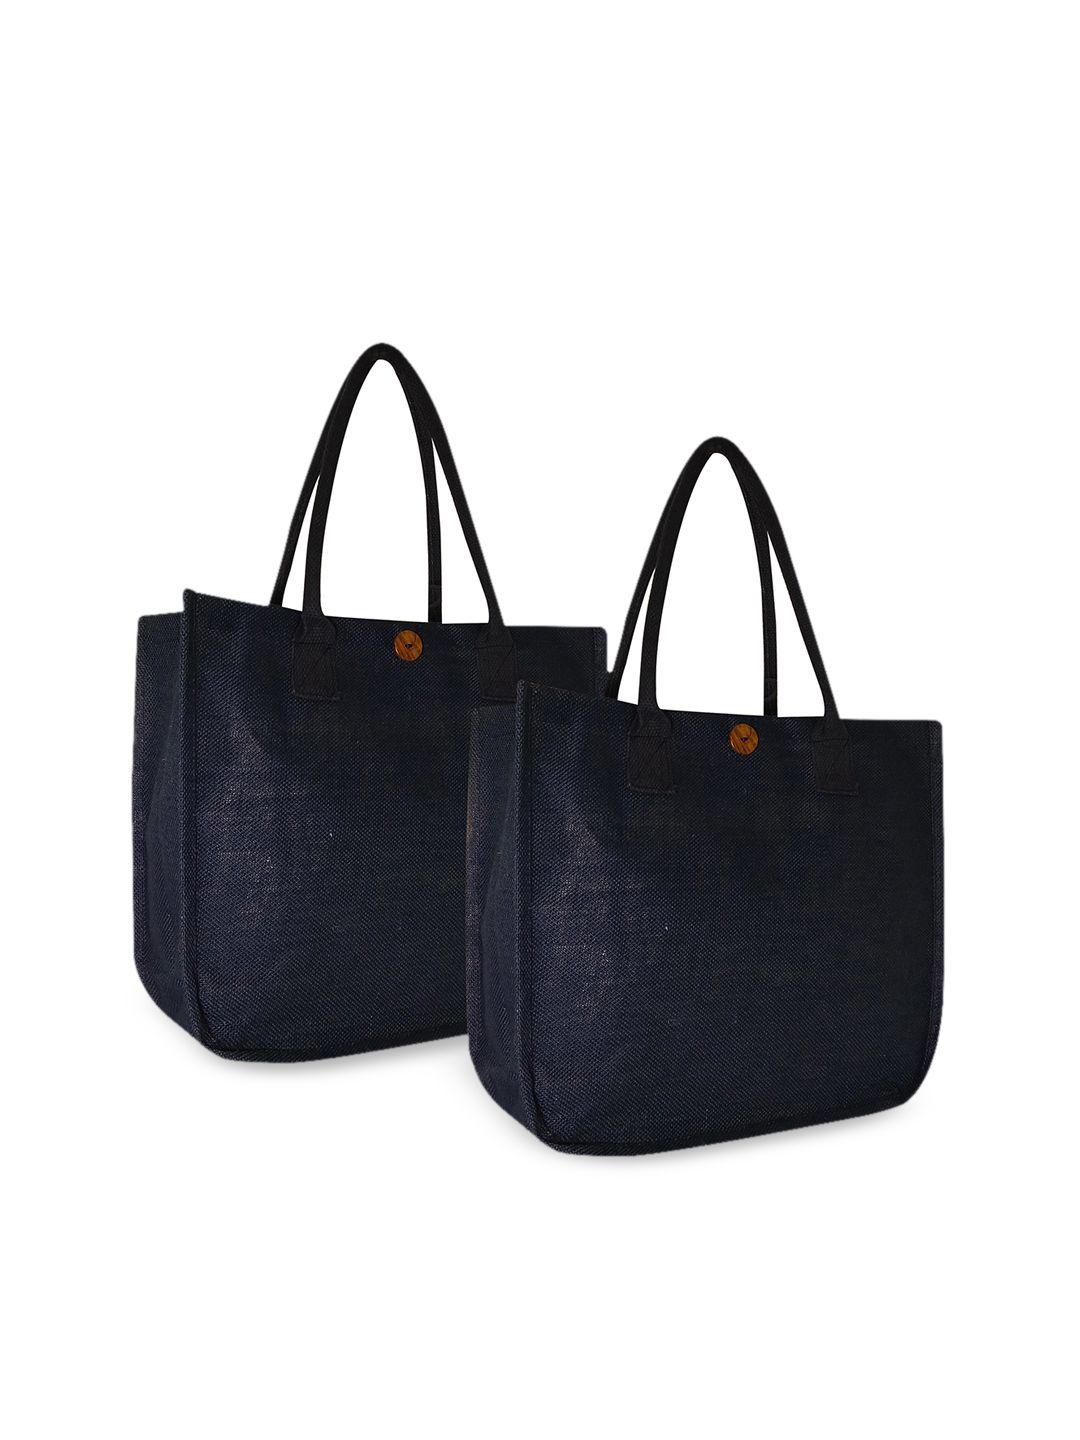 earthbags pack of 2 blue textured oversized shopper tote bags